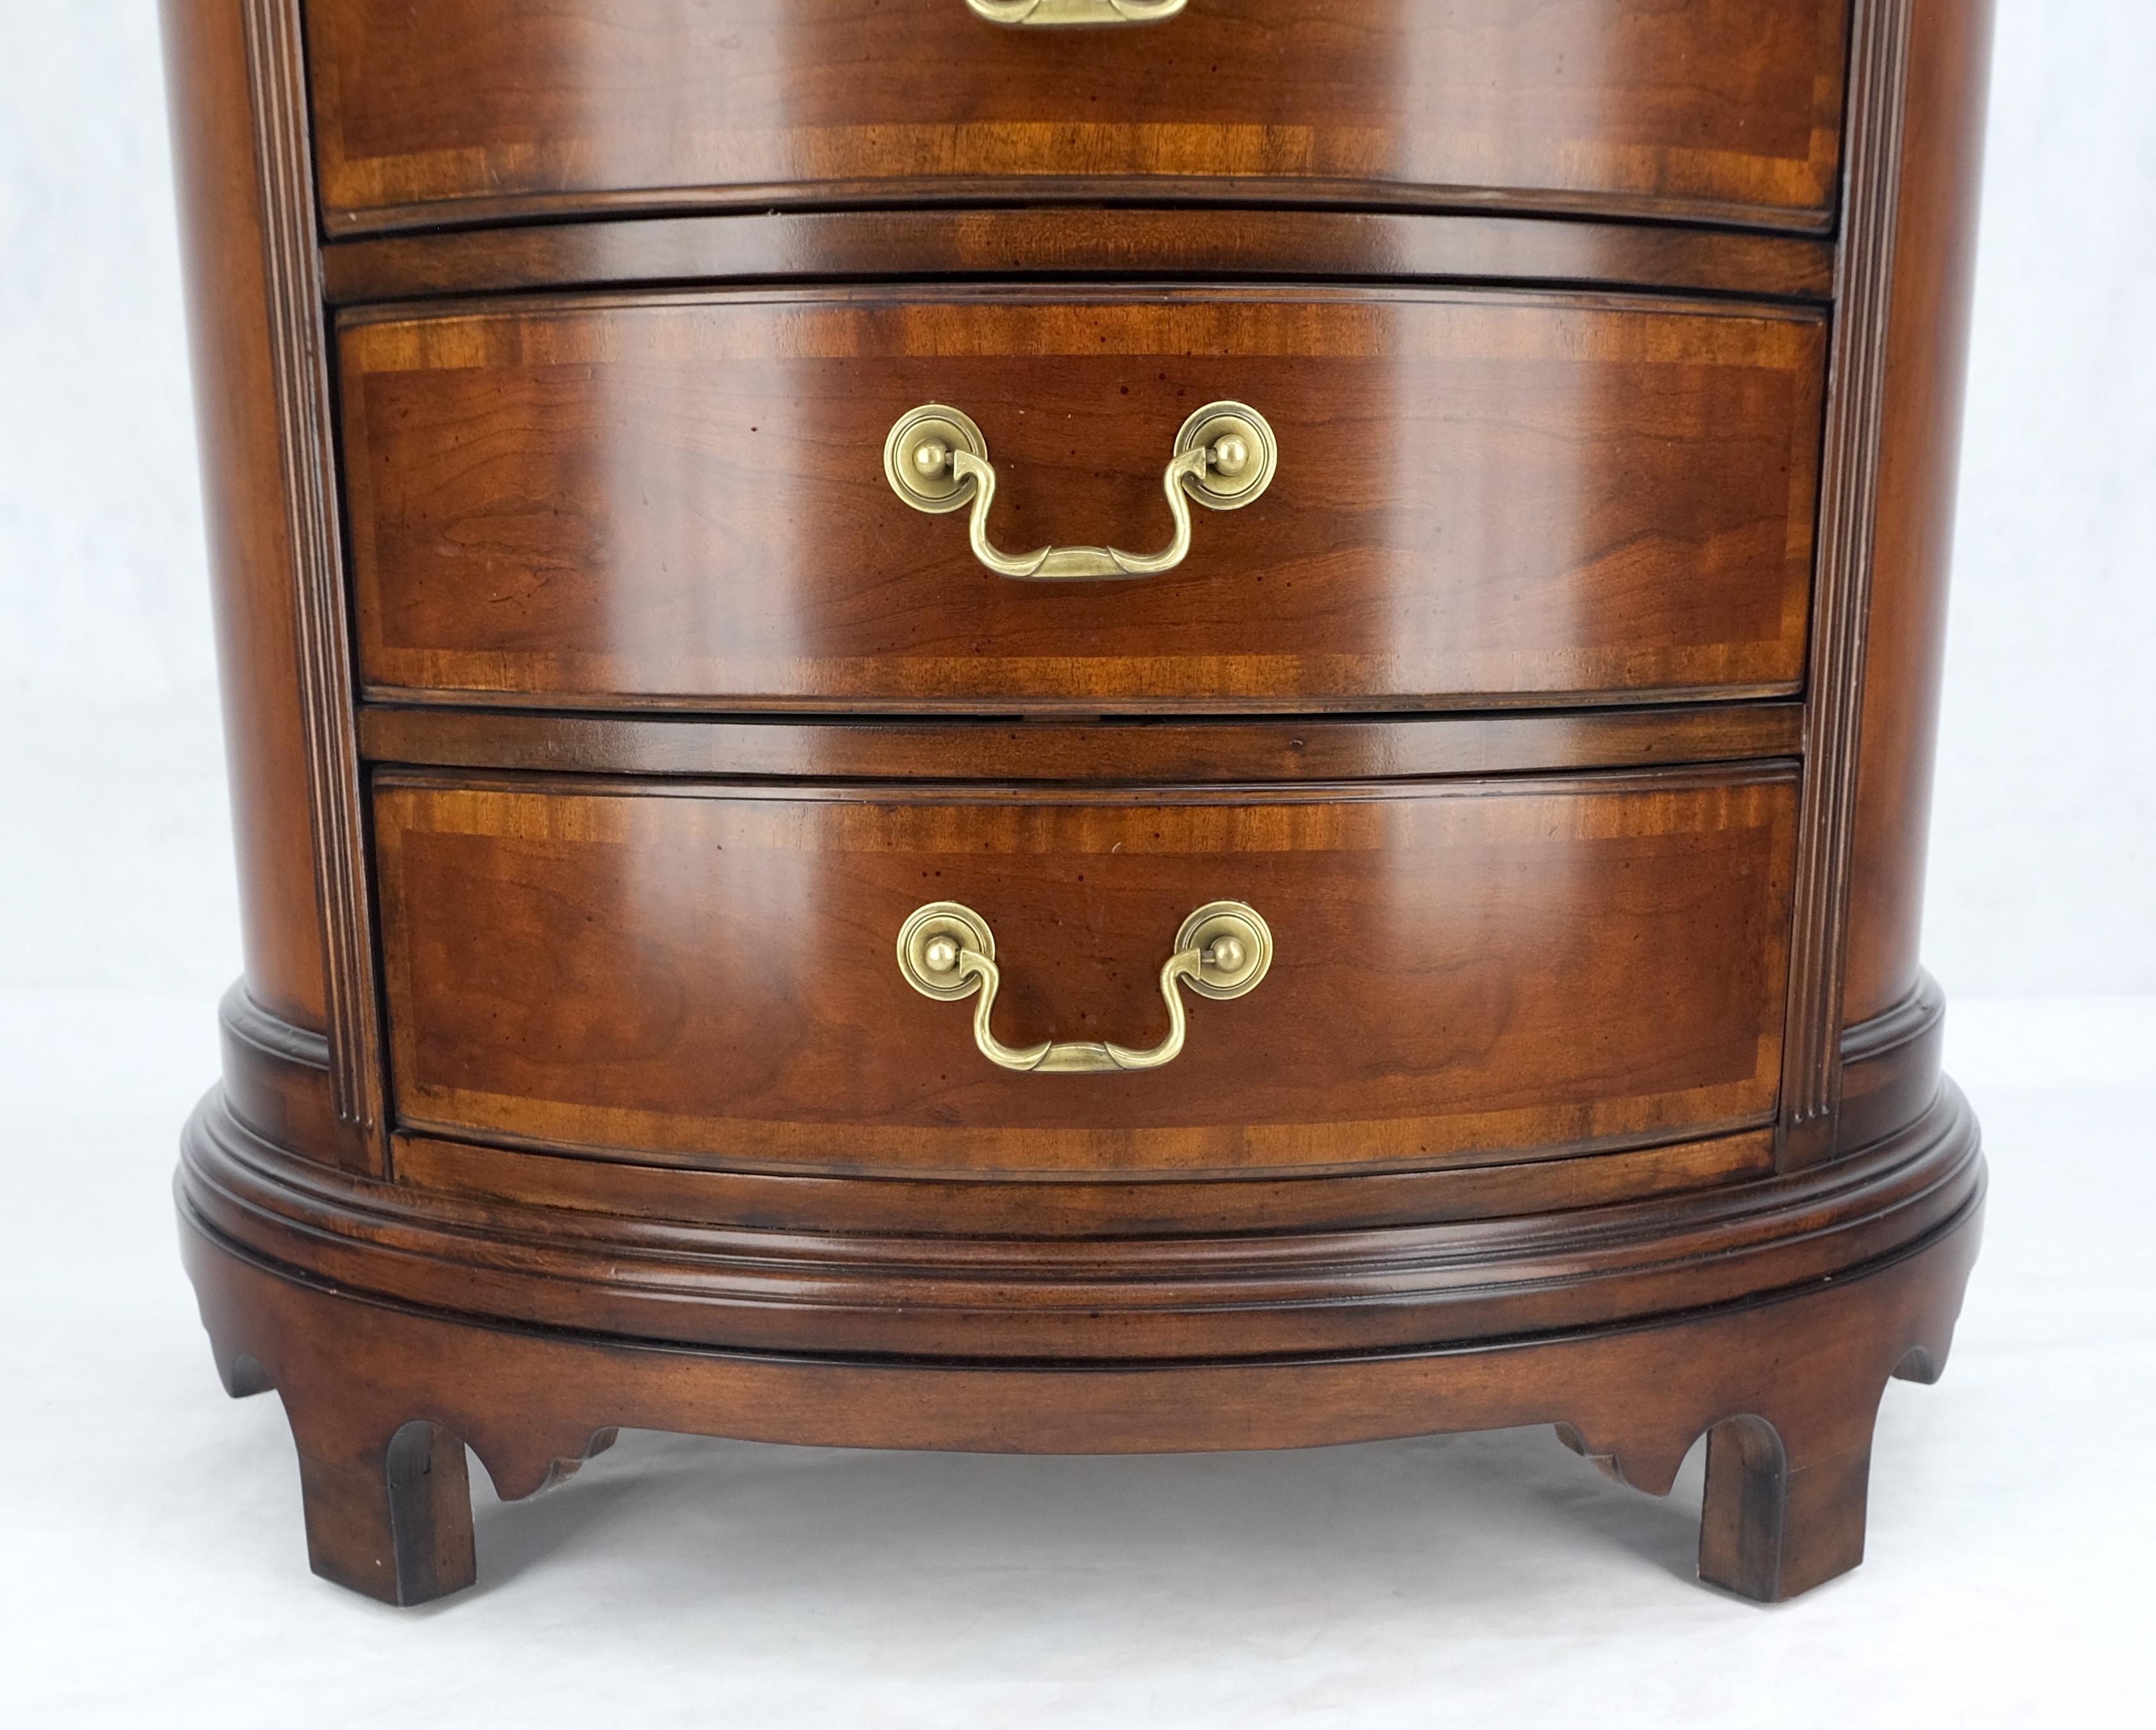 Pair of 4 Drawer Banded Top Demi Lune Consoles Dressers Brass Drop Pulls MINT! In Good Condition For Sale In Rockaway, NJ